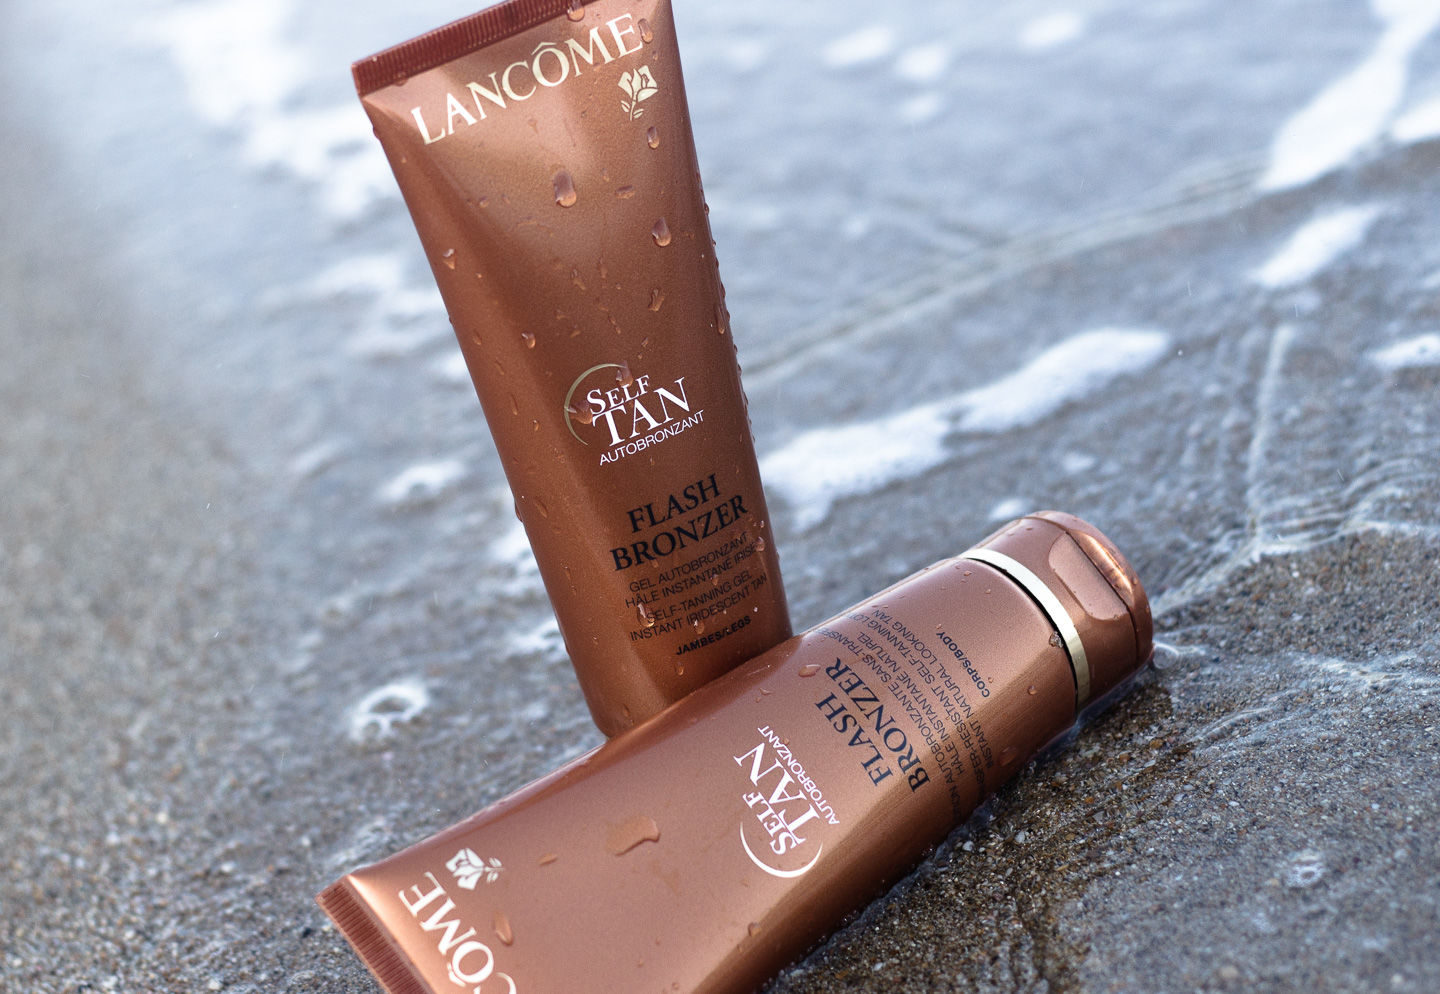 LANCOME FLASH BRONZER | REVIEW LIPGLOSS AND Beauty, Lifestyle and Blog